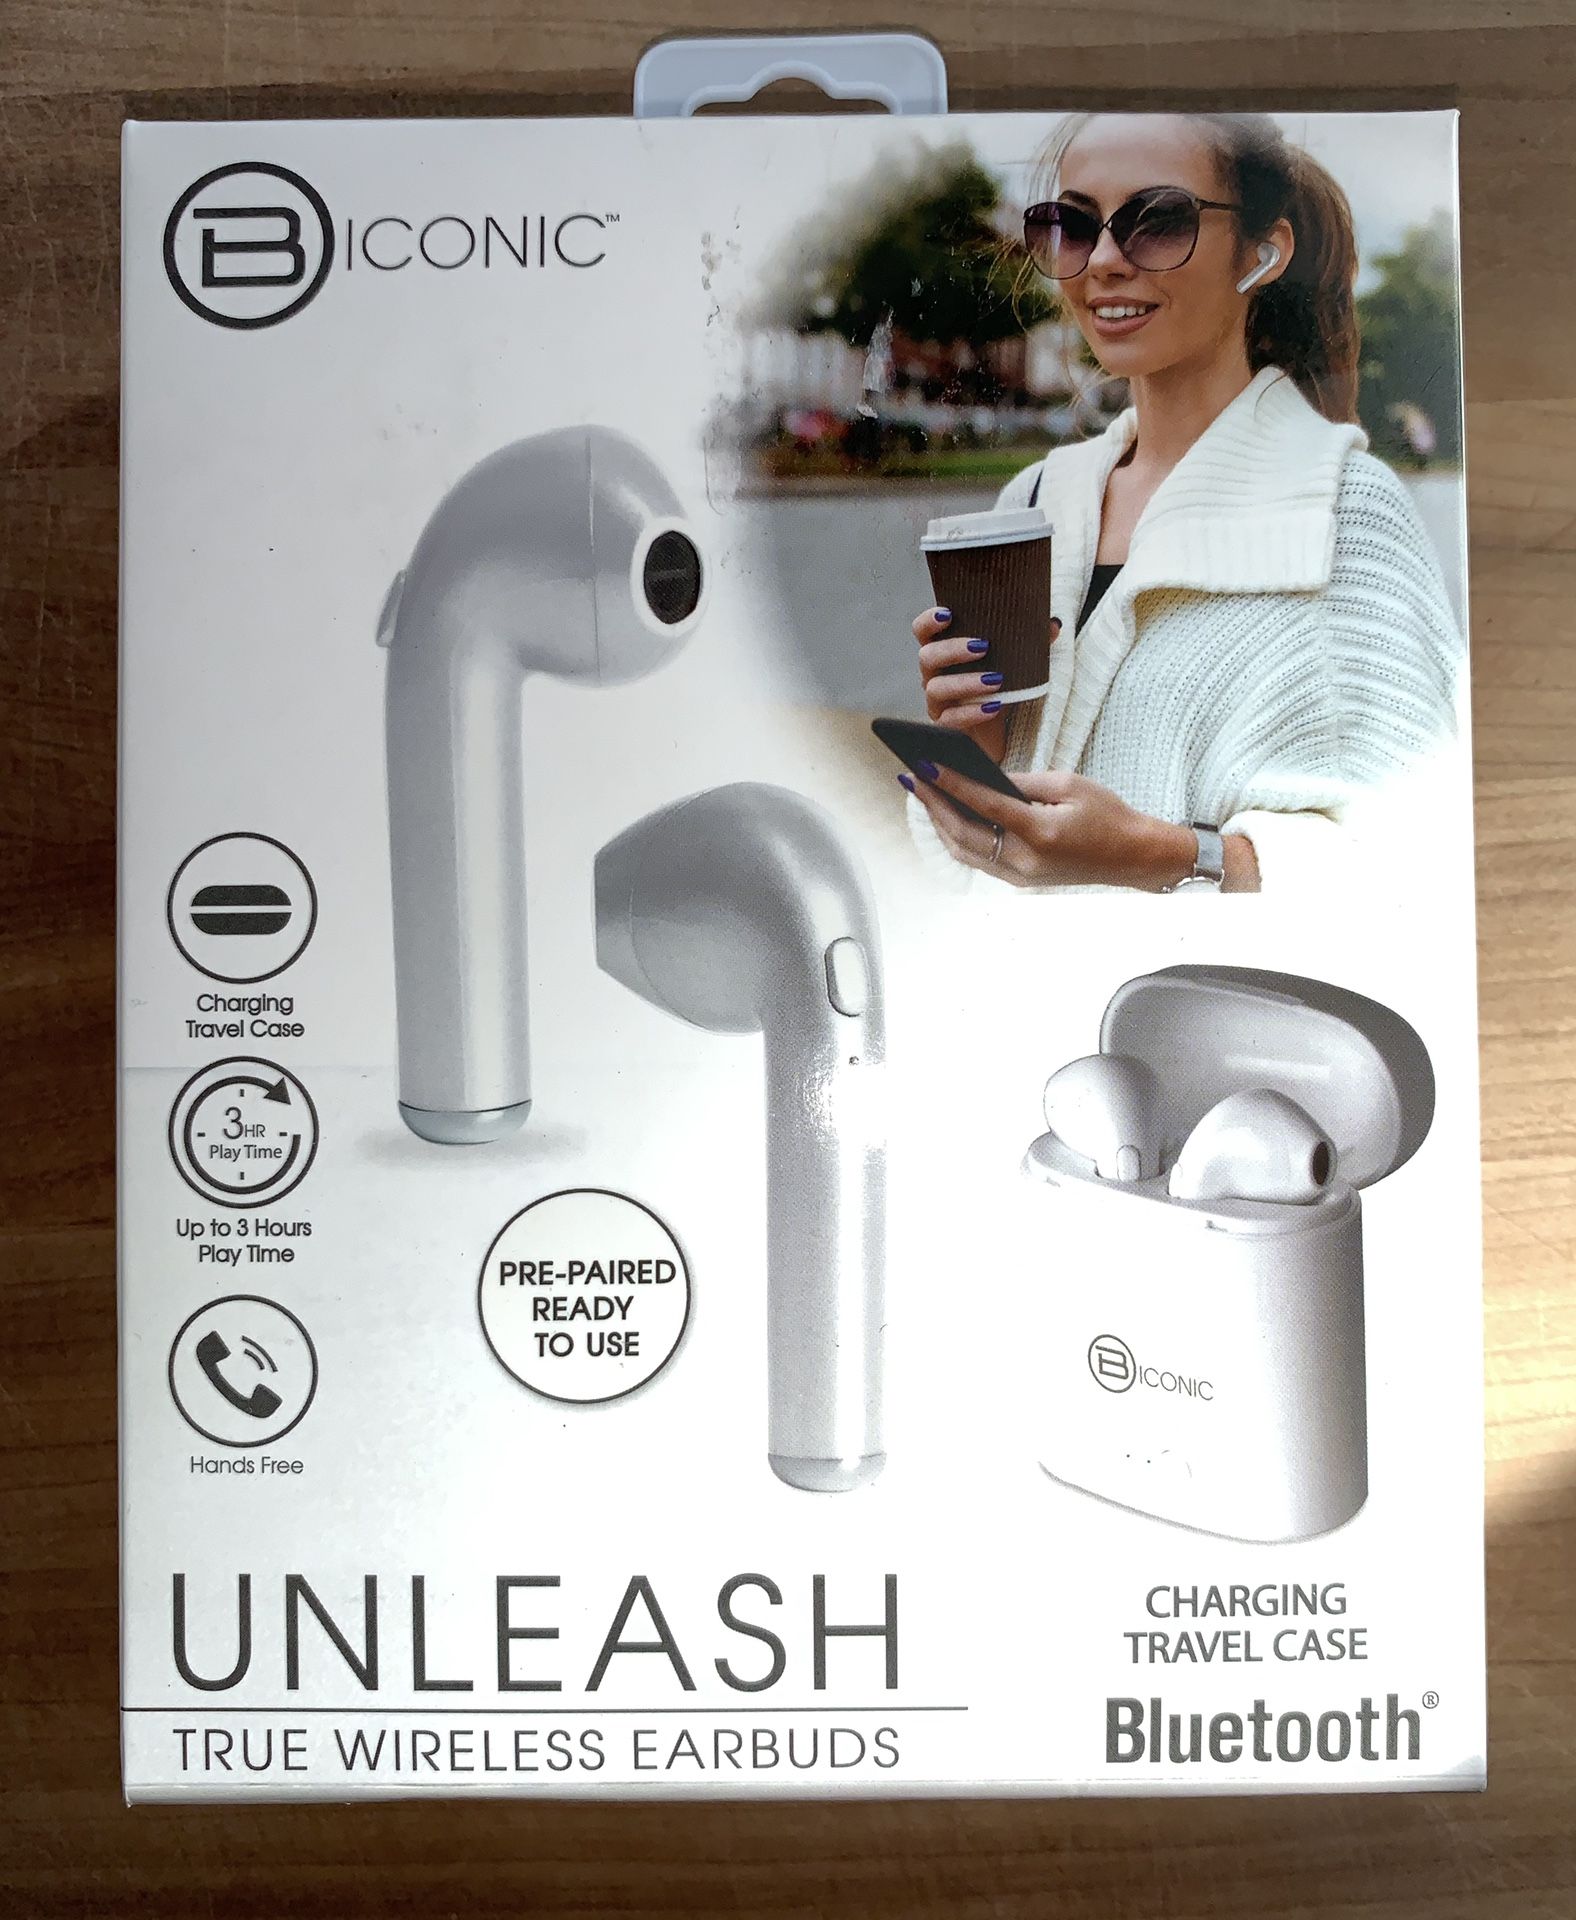 Biconic Wireless Earbuds Bluetooth Headsets, Bluetooth Earbuds, True Wireless Earbuds Stereo In-Ear Earpieces with 2 Built-in Mic